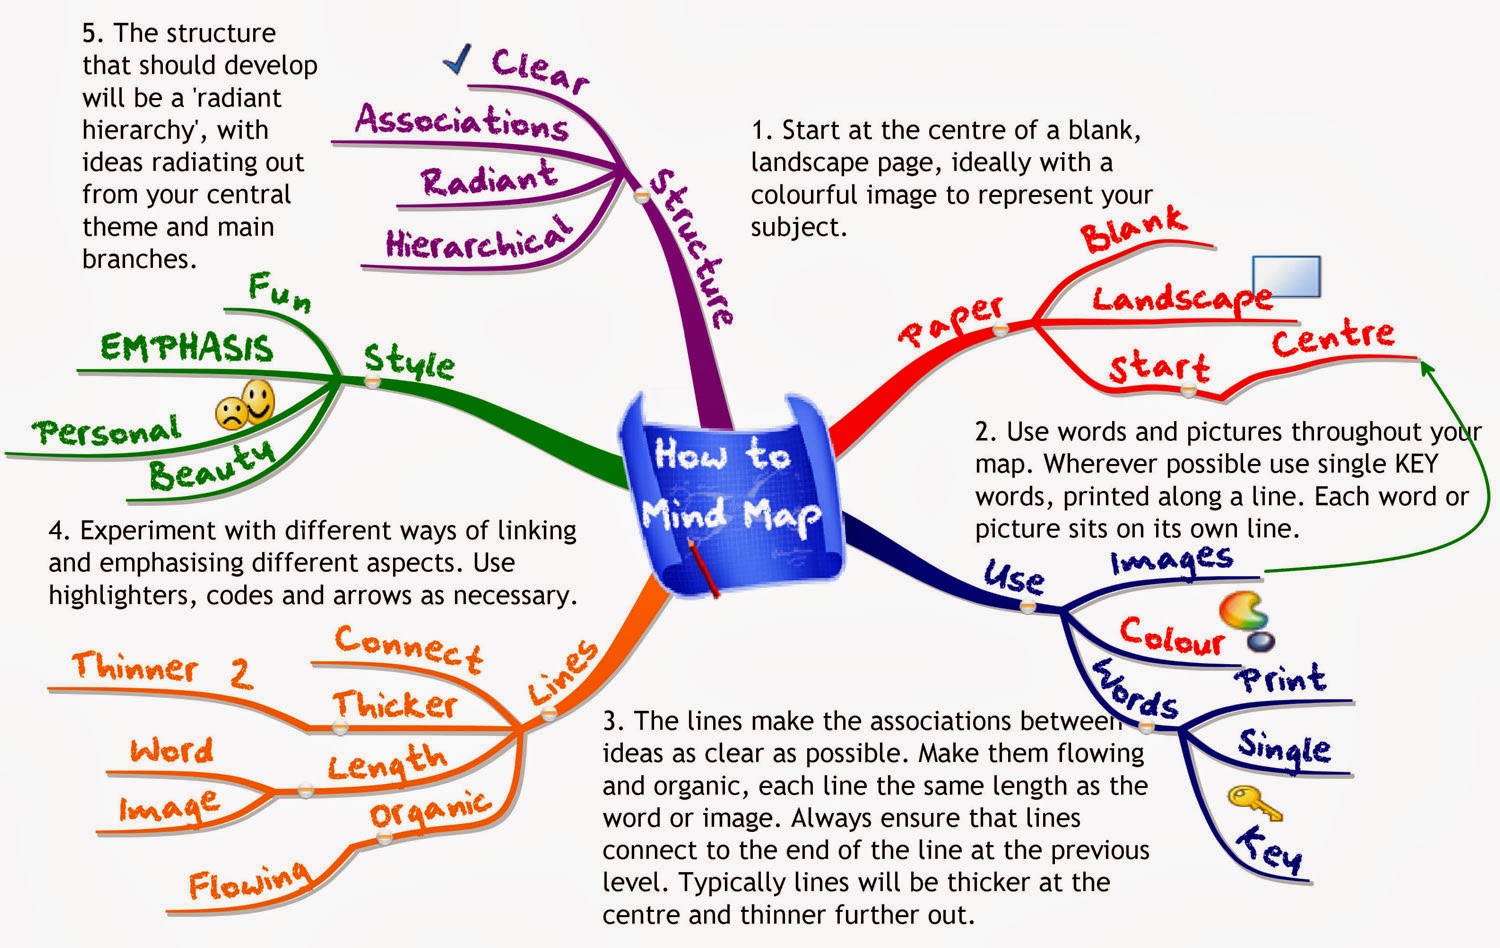 Mind Map Techniques Free Toools And Guideliness By Tony Buzan